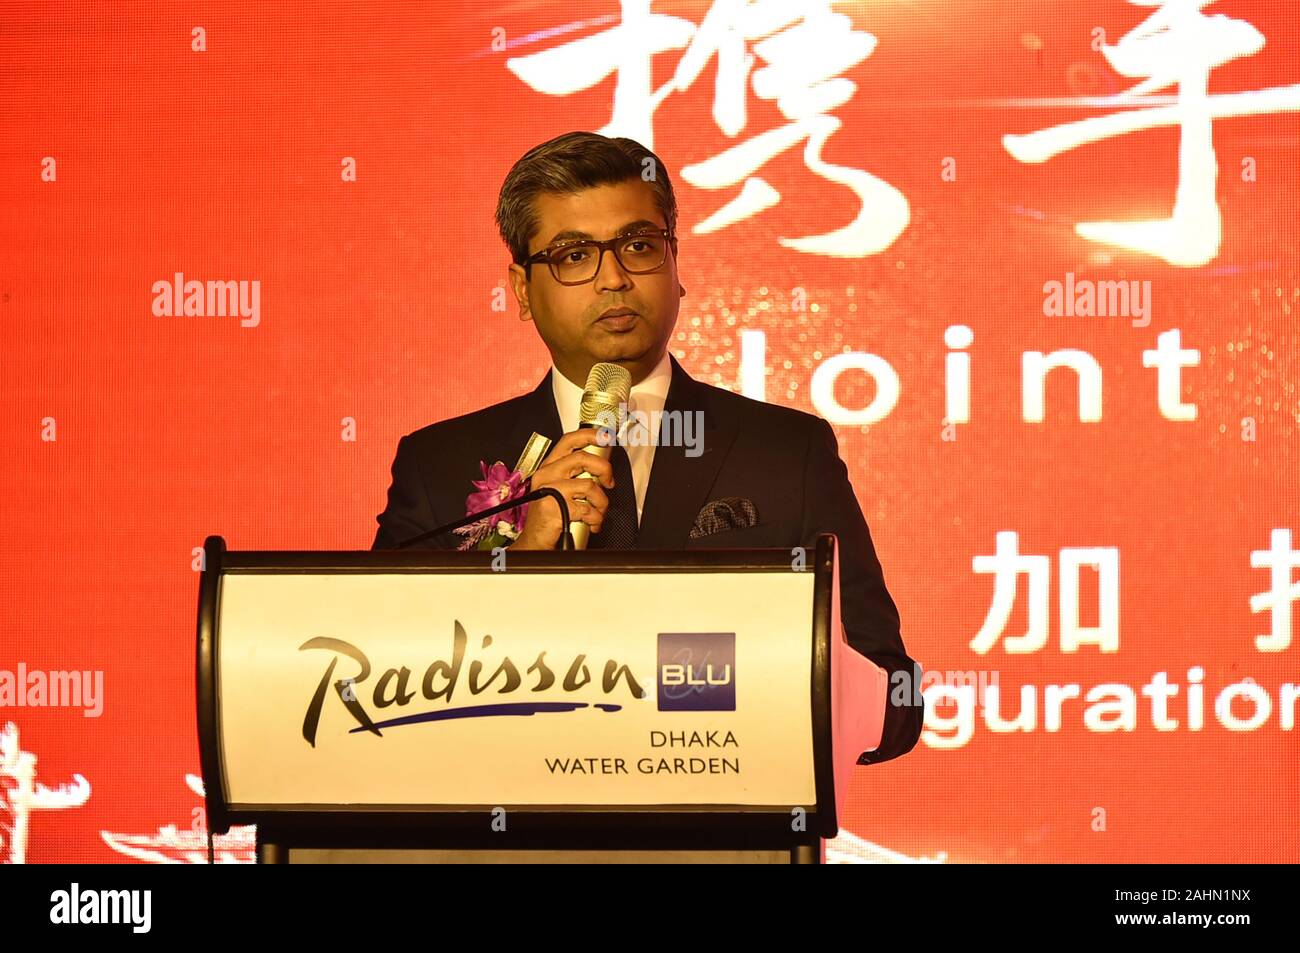 (191231) -- DHAKA, Dec. 31, 2019 (Xinhua) -- Federation of Bangladesh Chambers of Commerce and Industries (FBCCI) President Sheikh Fazle Fahim speaks at the inauguration ceremony of the Chinese Enterprises Association in Bangladesh (CEAB) in Dhaka, Bangladesh on Dec. 30, 2019. An association dedicated to bolster Chinese trade and investment in Bangladesh was launched Monday in the capital of Dhaka. Bangladeshi Commerce Minister Tipu Munshi and Chinese Ambassador to Bangladesh Li Jiming, along with distinguished guests, launched the Chinese Enterprises Association in Bangladesh (CEAB) which ha Stock Photo